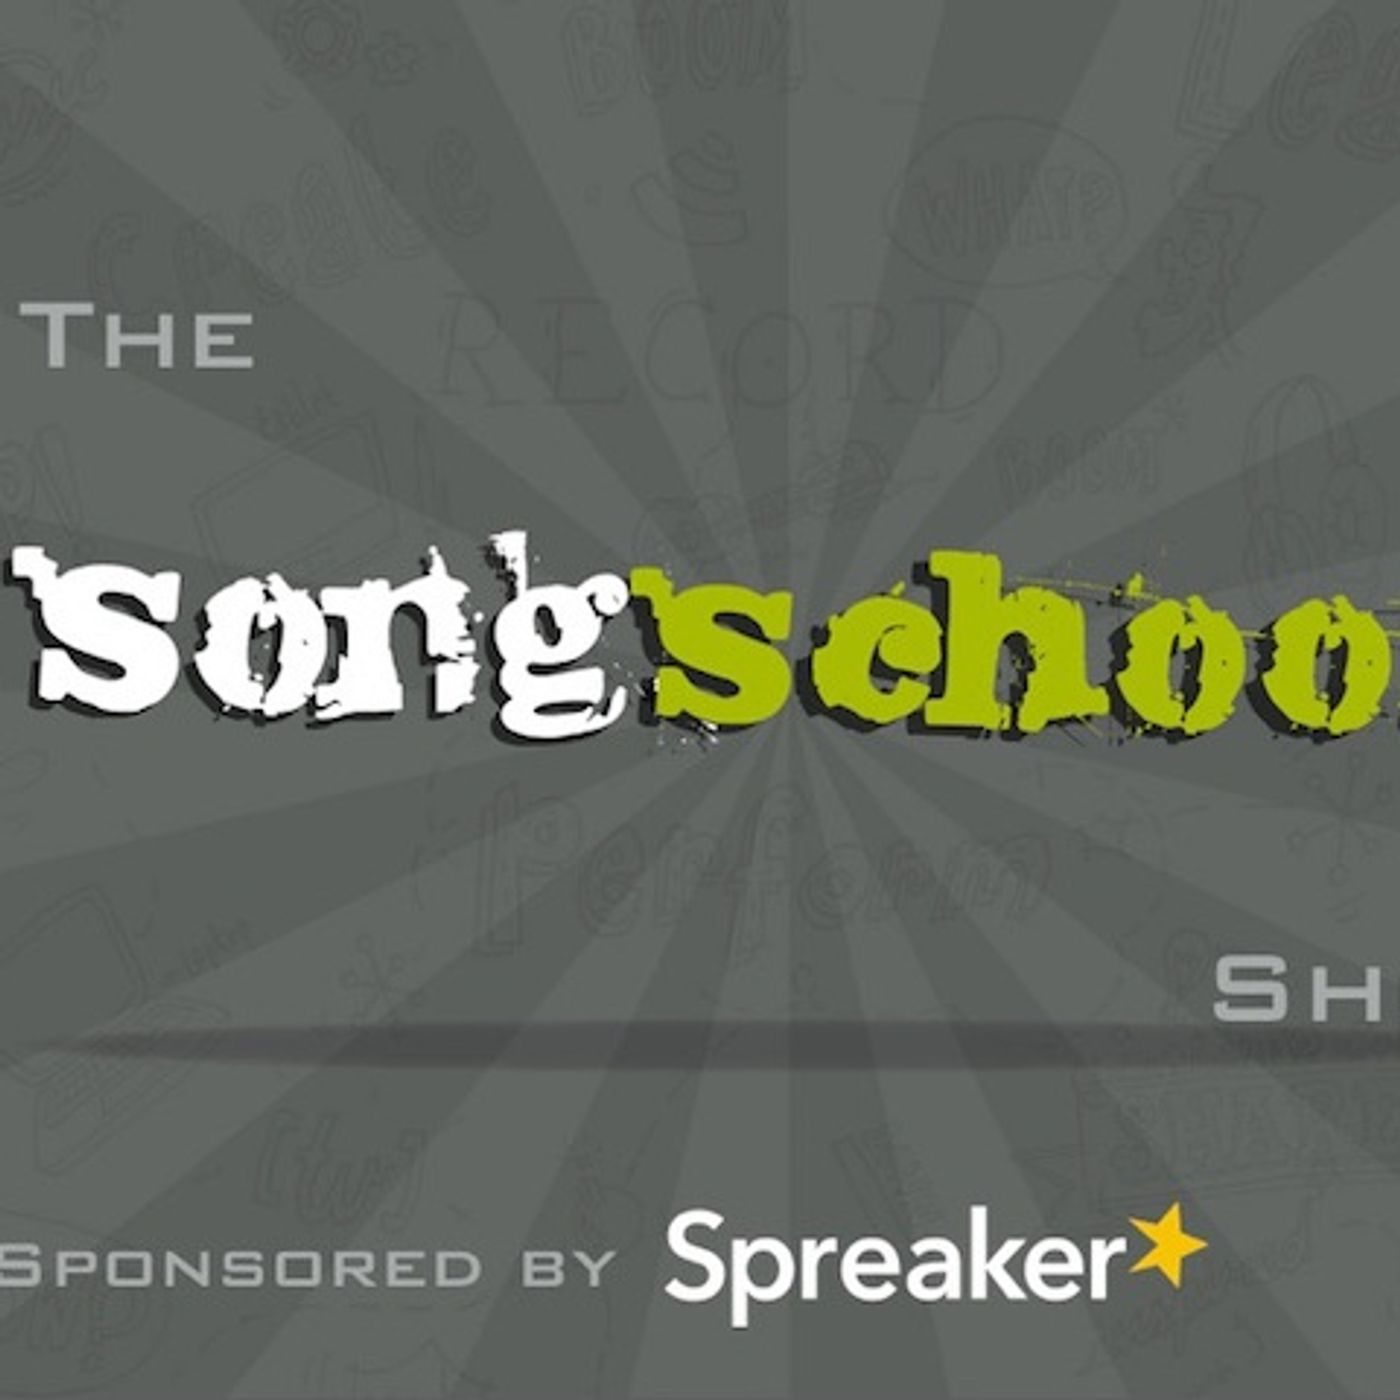 The Songschool Show @ Nenagh College